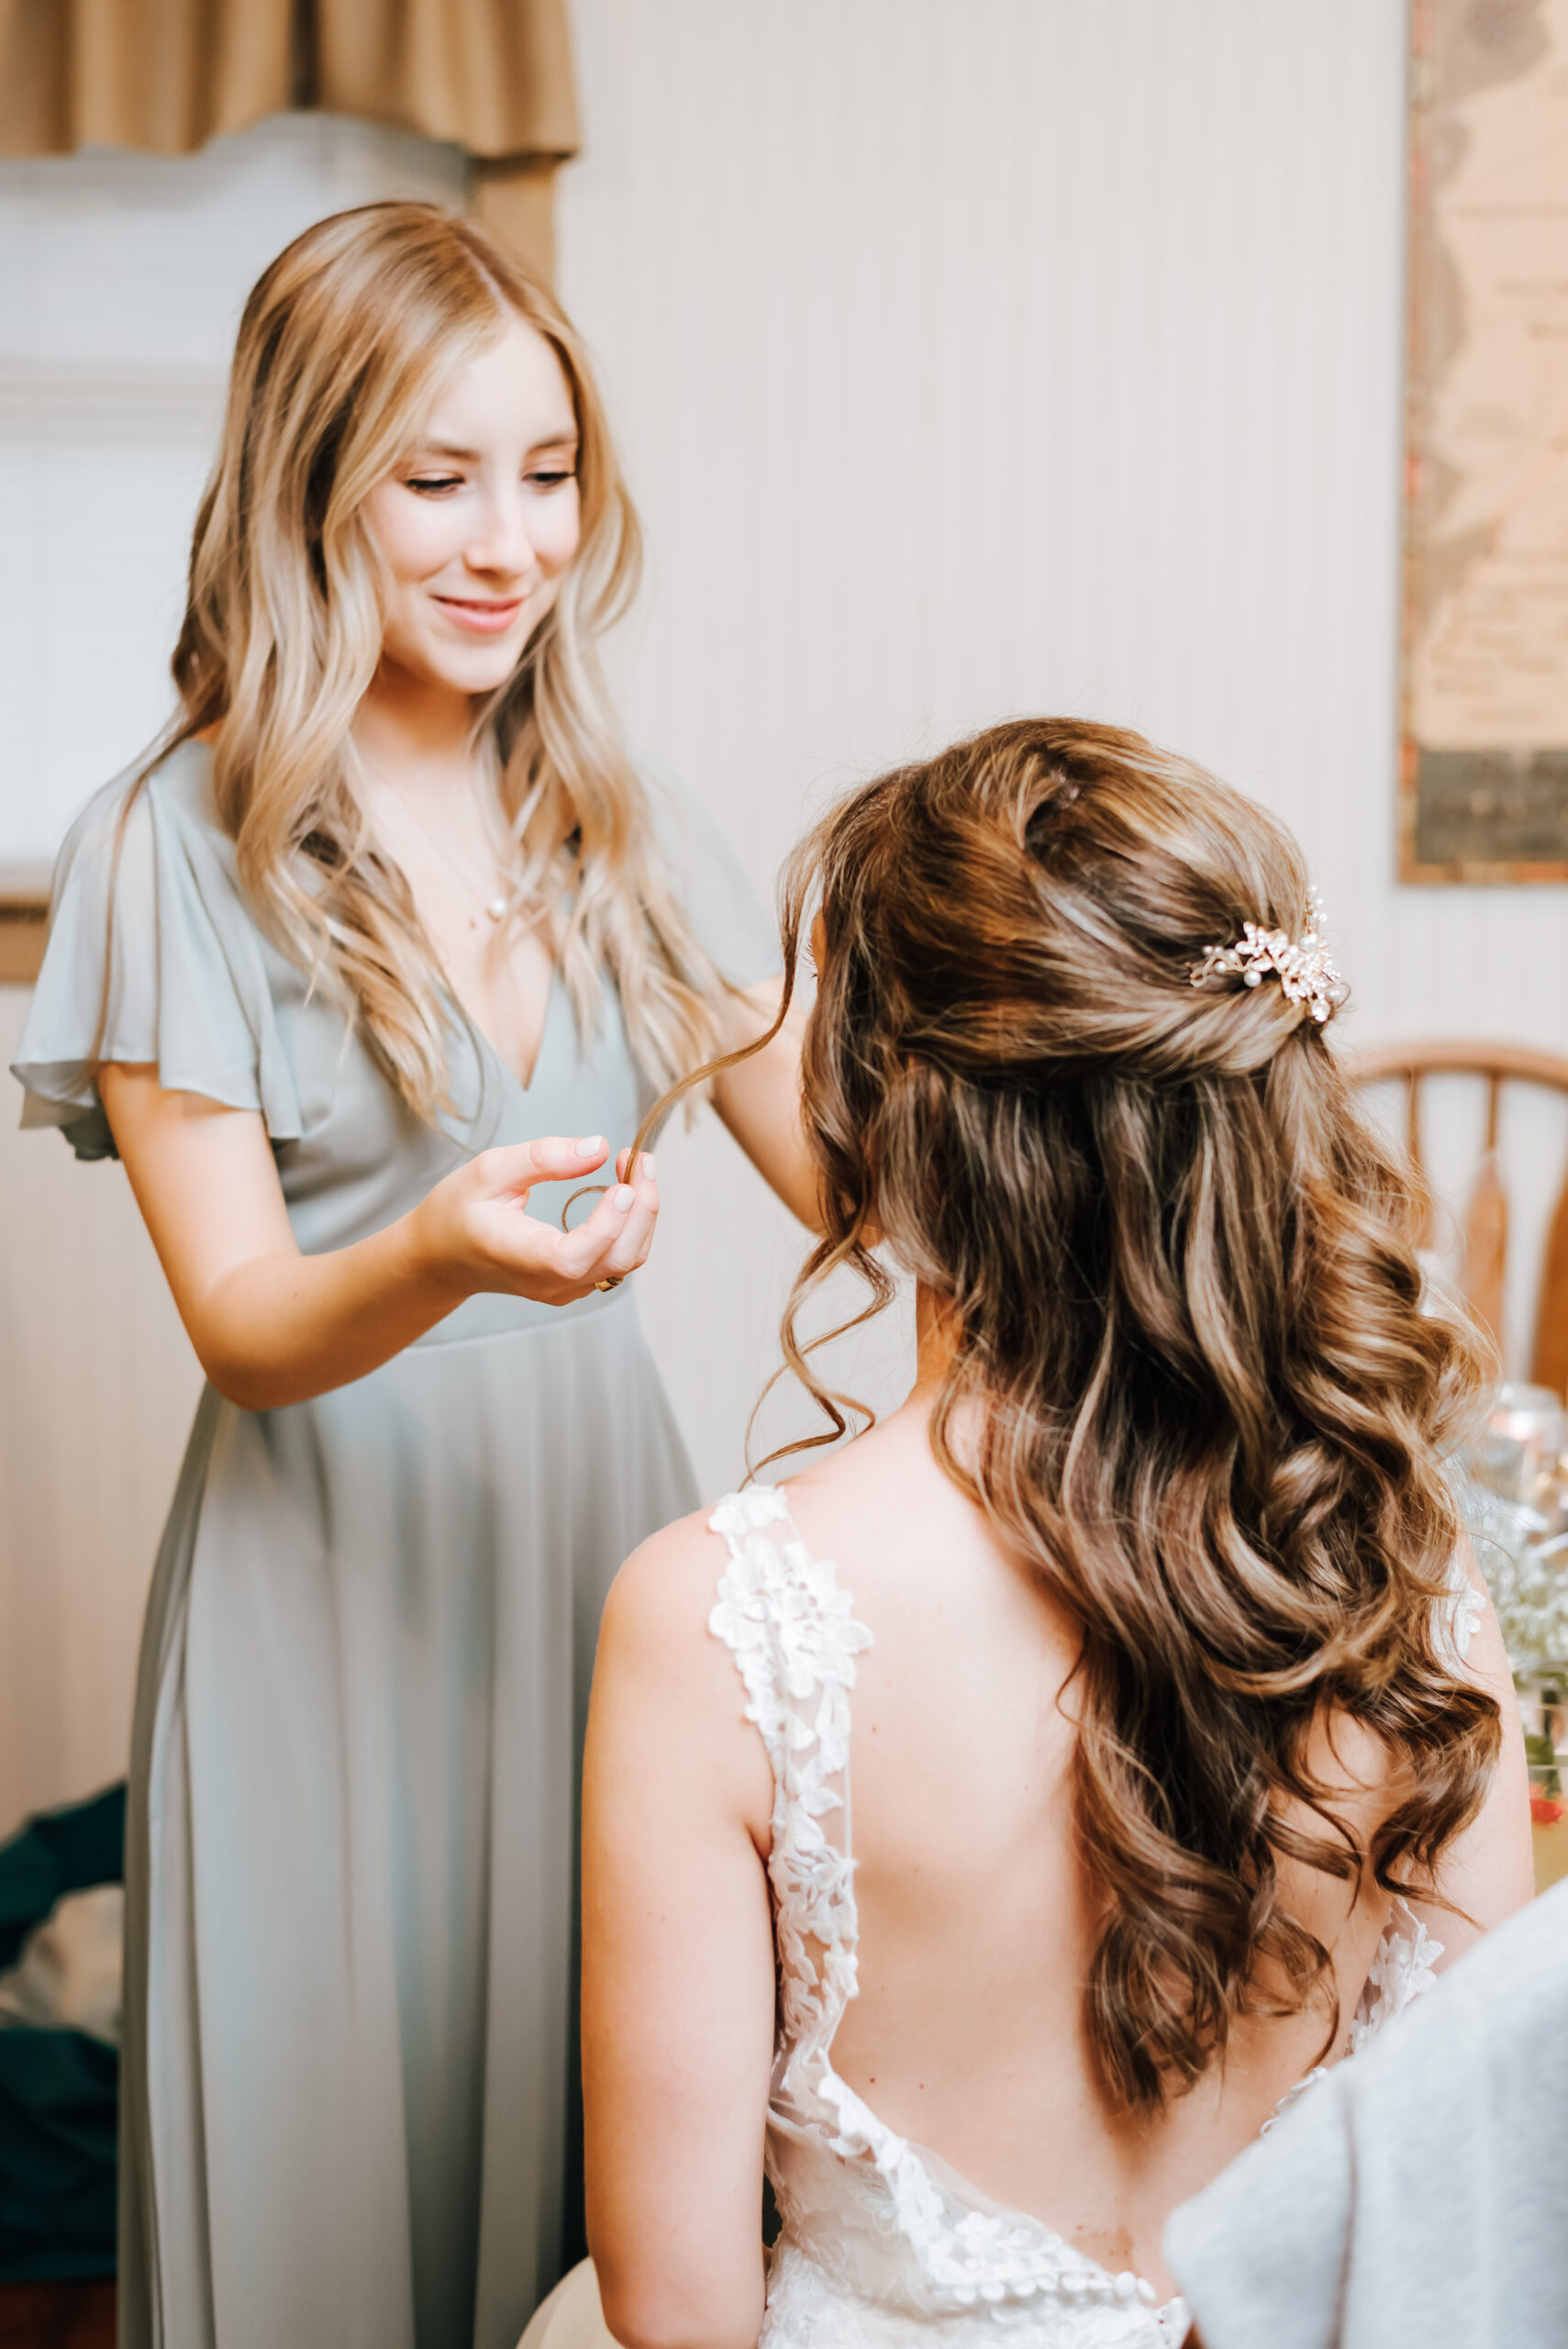 Bride's sister does final touch ups on the bride's hair